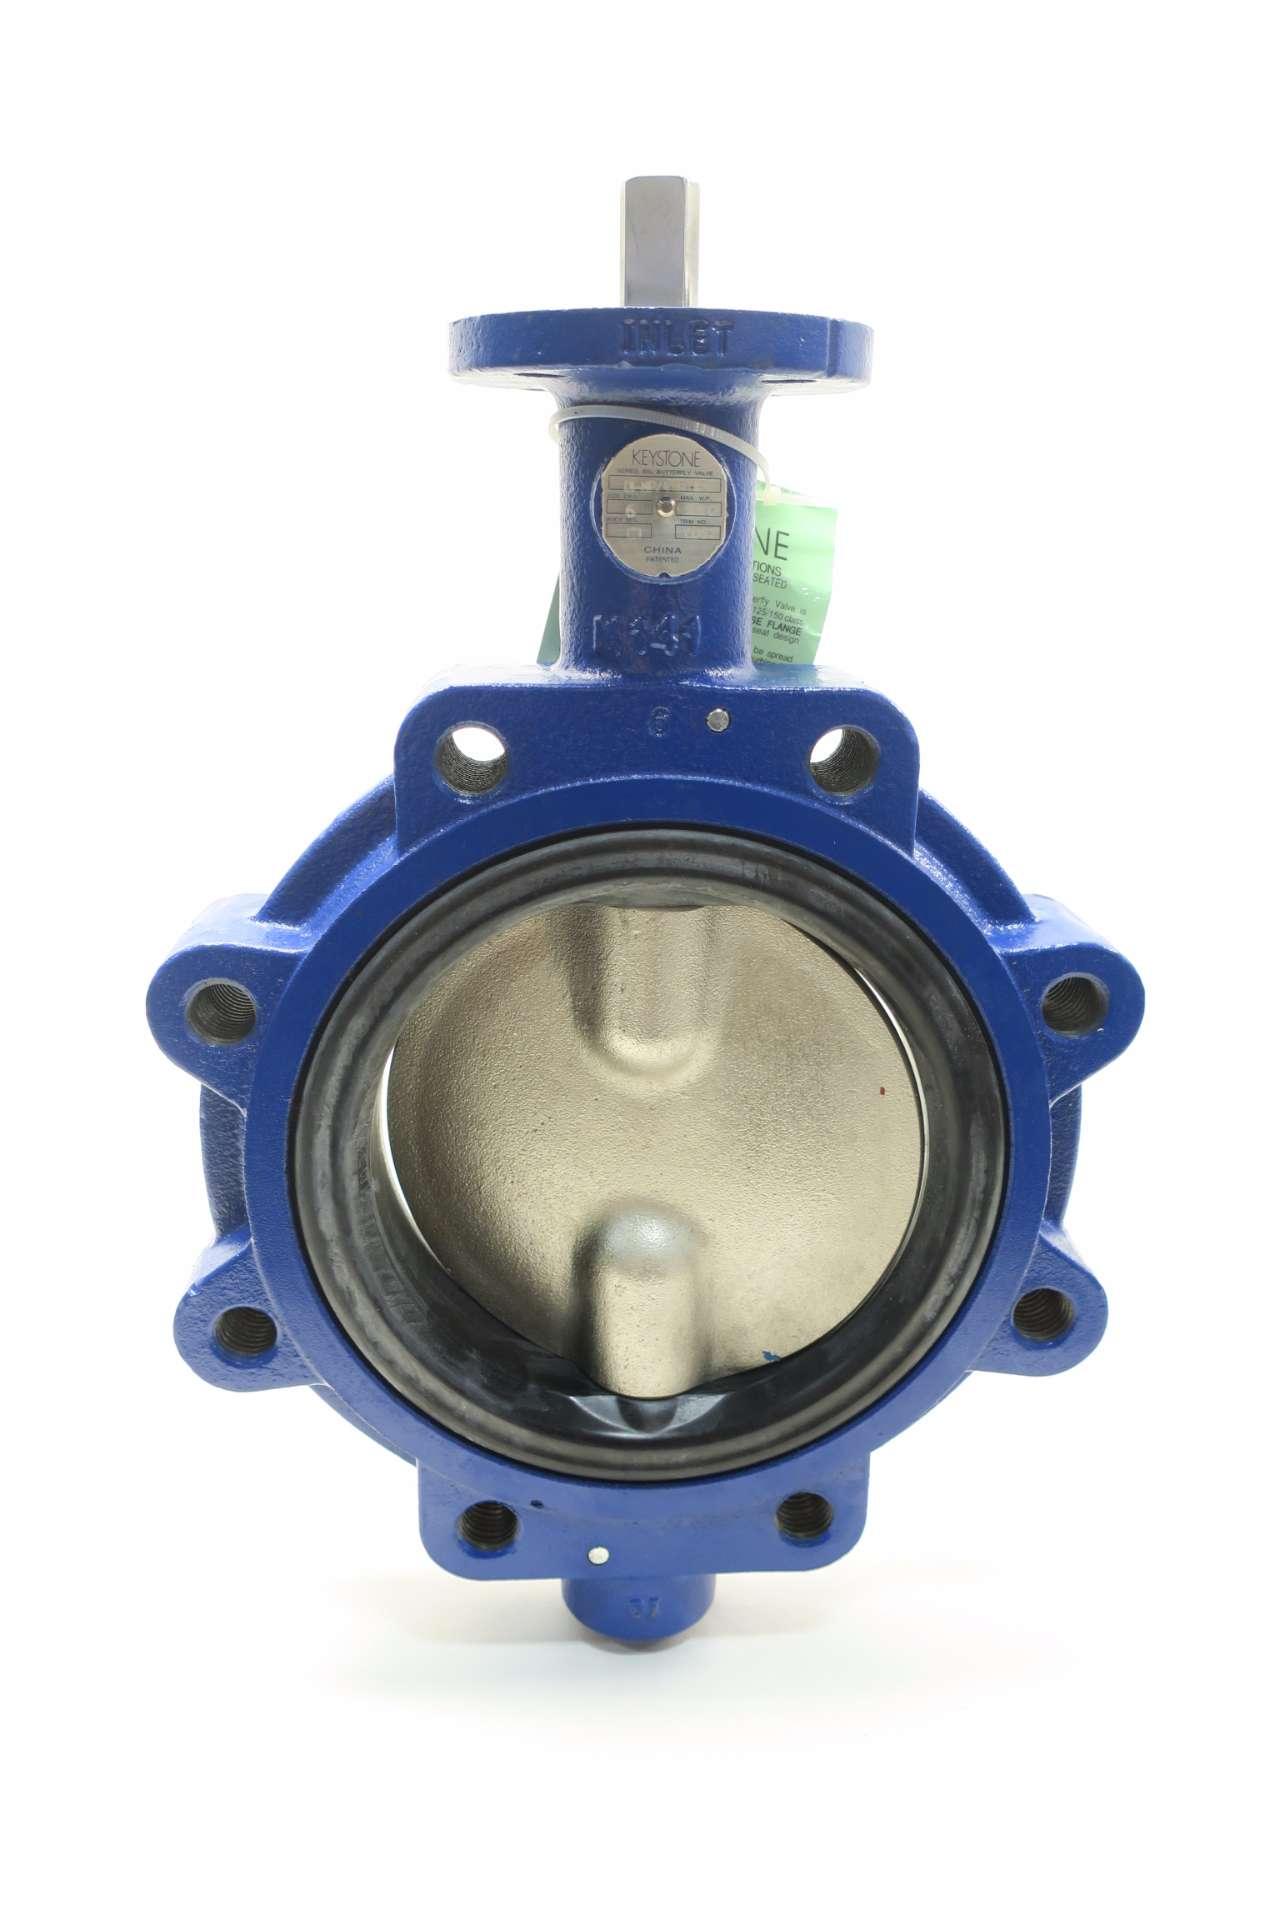 6/" Inch Butterfly Valve Wafer Type 200PSI Ductile iron body DI disc Buna-N Seat